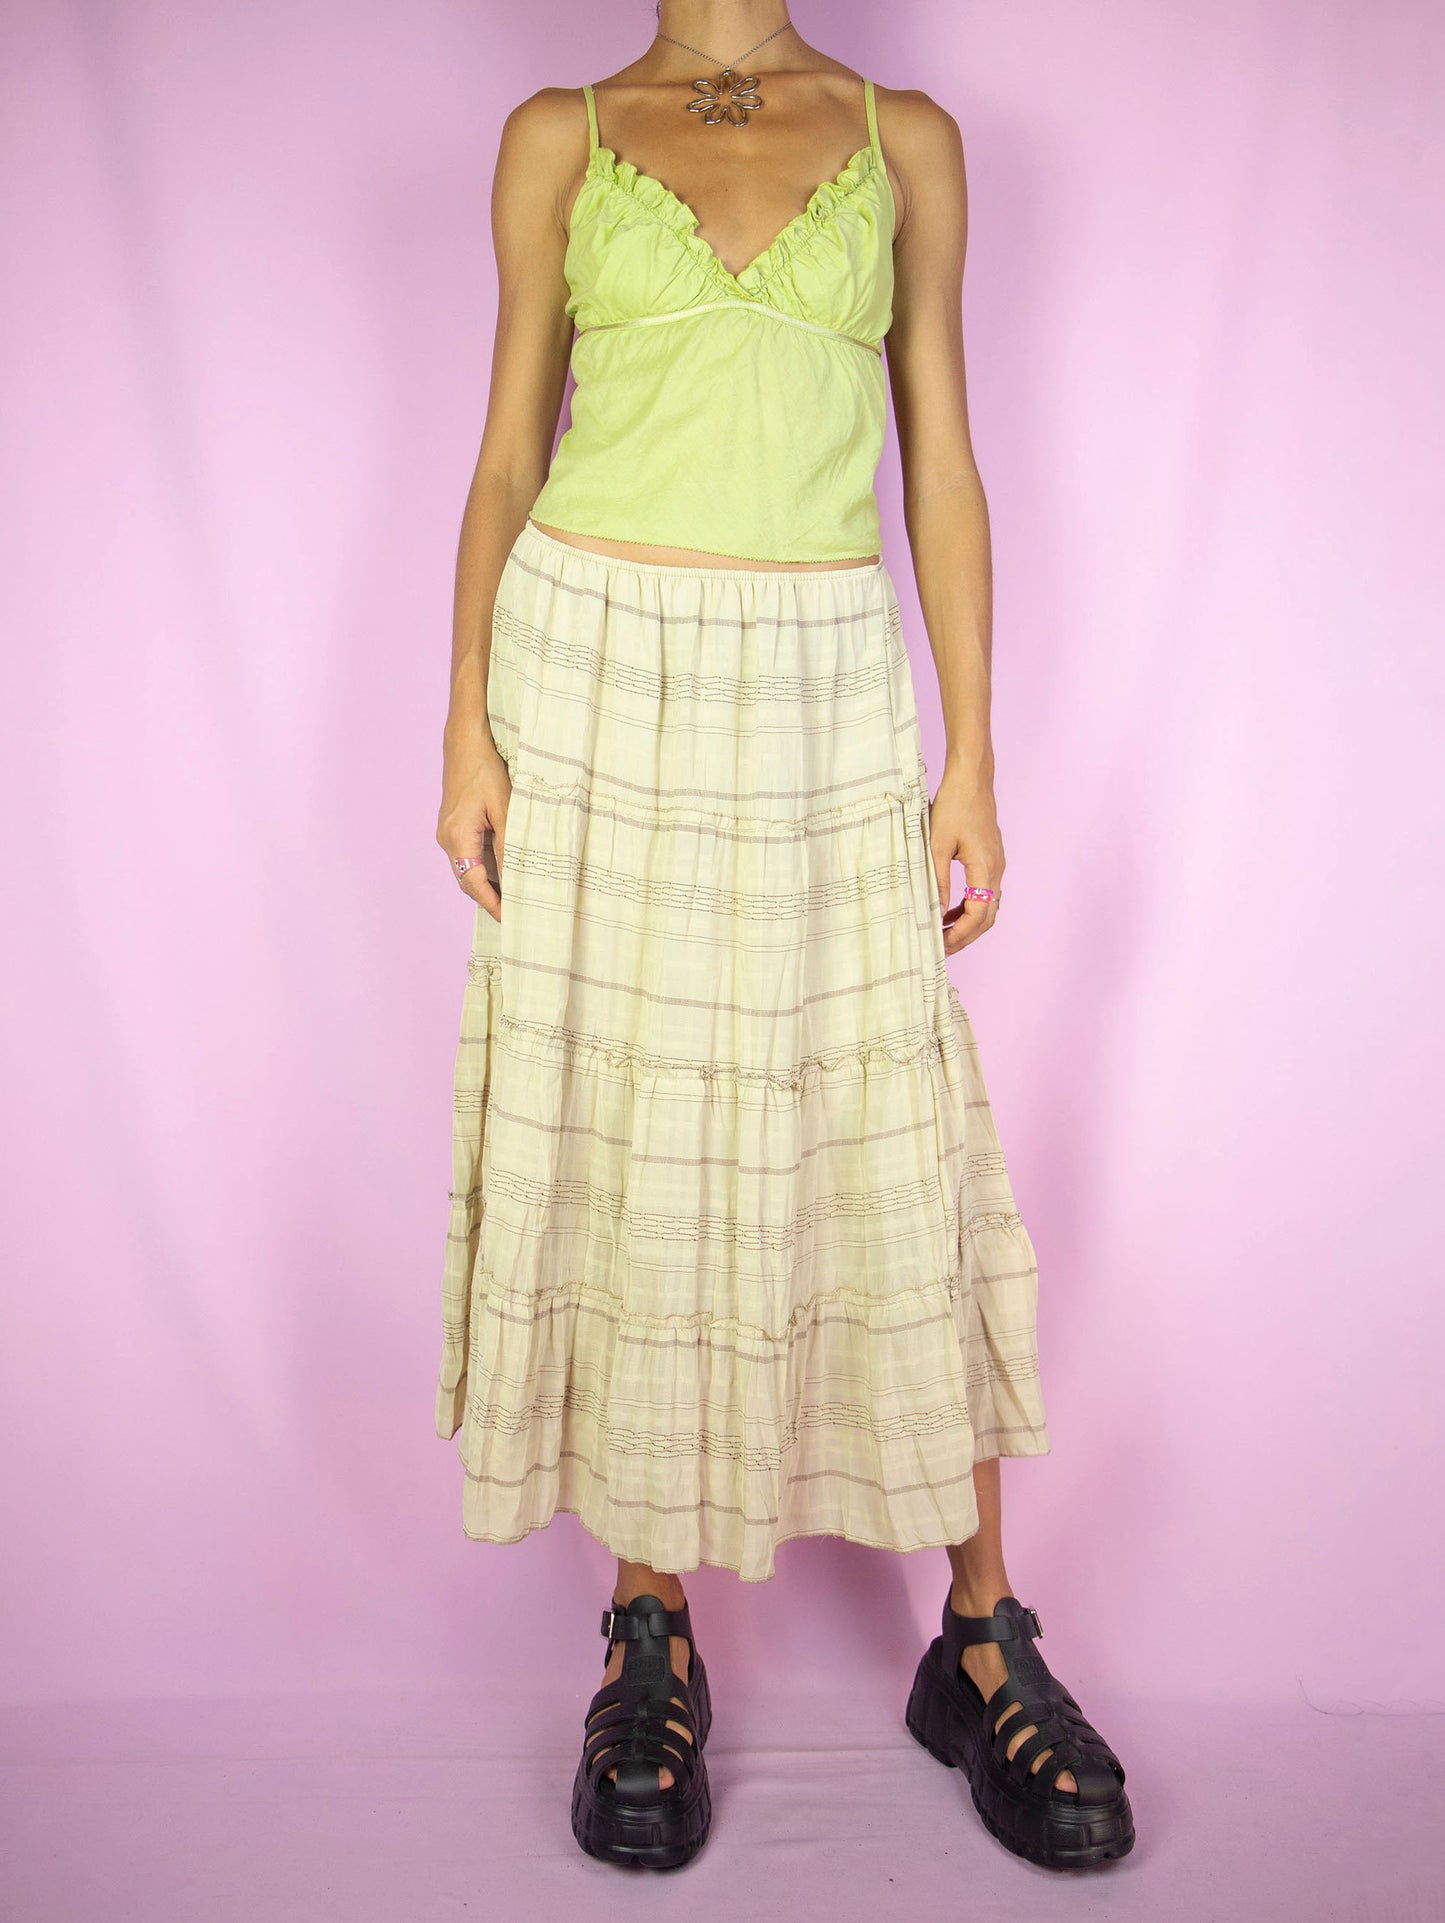 The Vintage 90s Beige Tiered Midi Skirt is a beige and brown striped tiered skirt with an elastic waist. Cottage prairie milkmaid inspired 1990s boho peasant midi skirt.